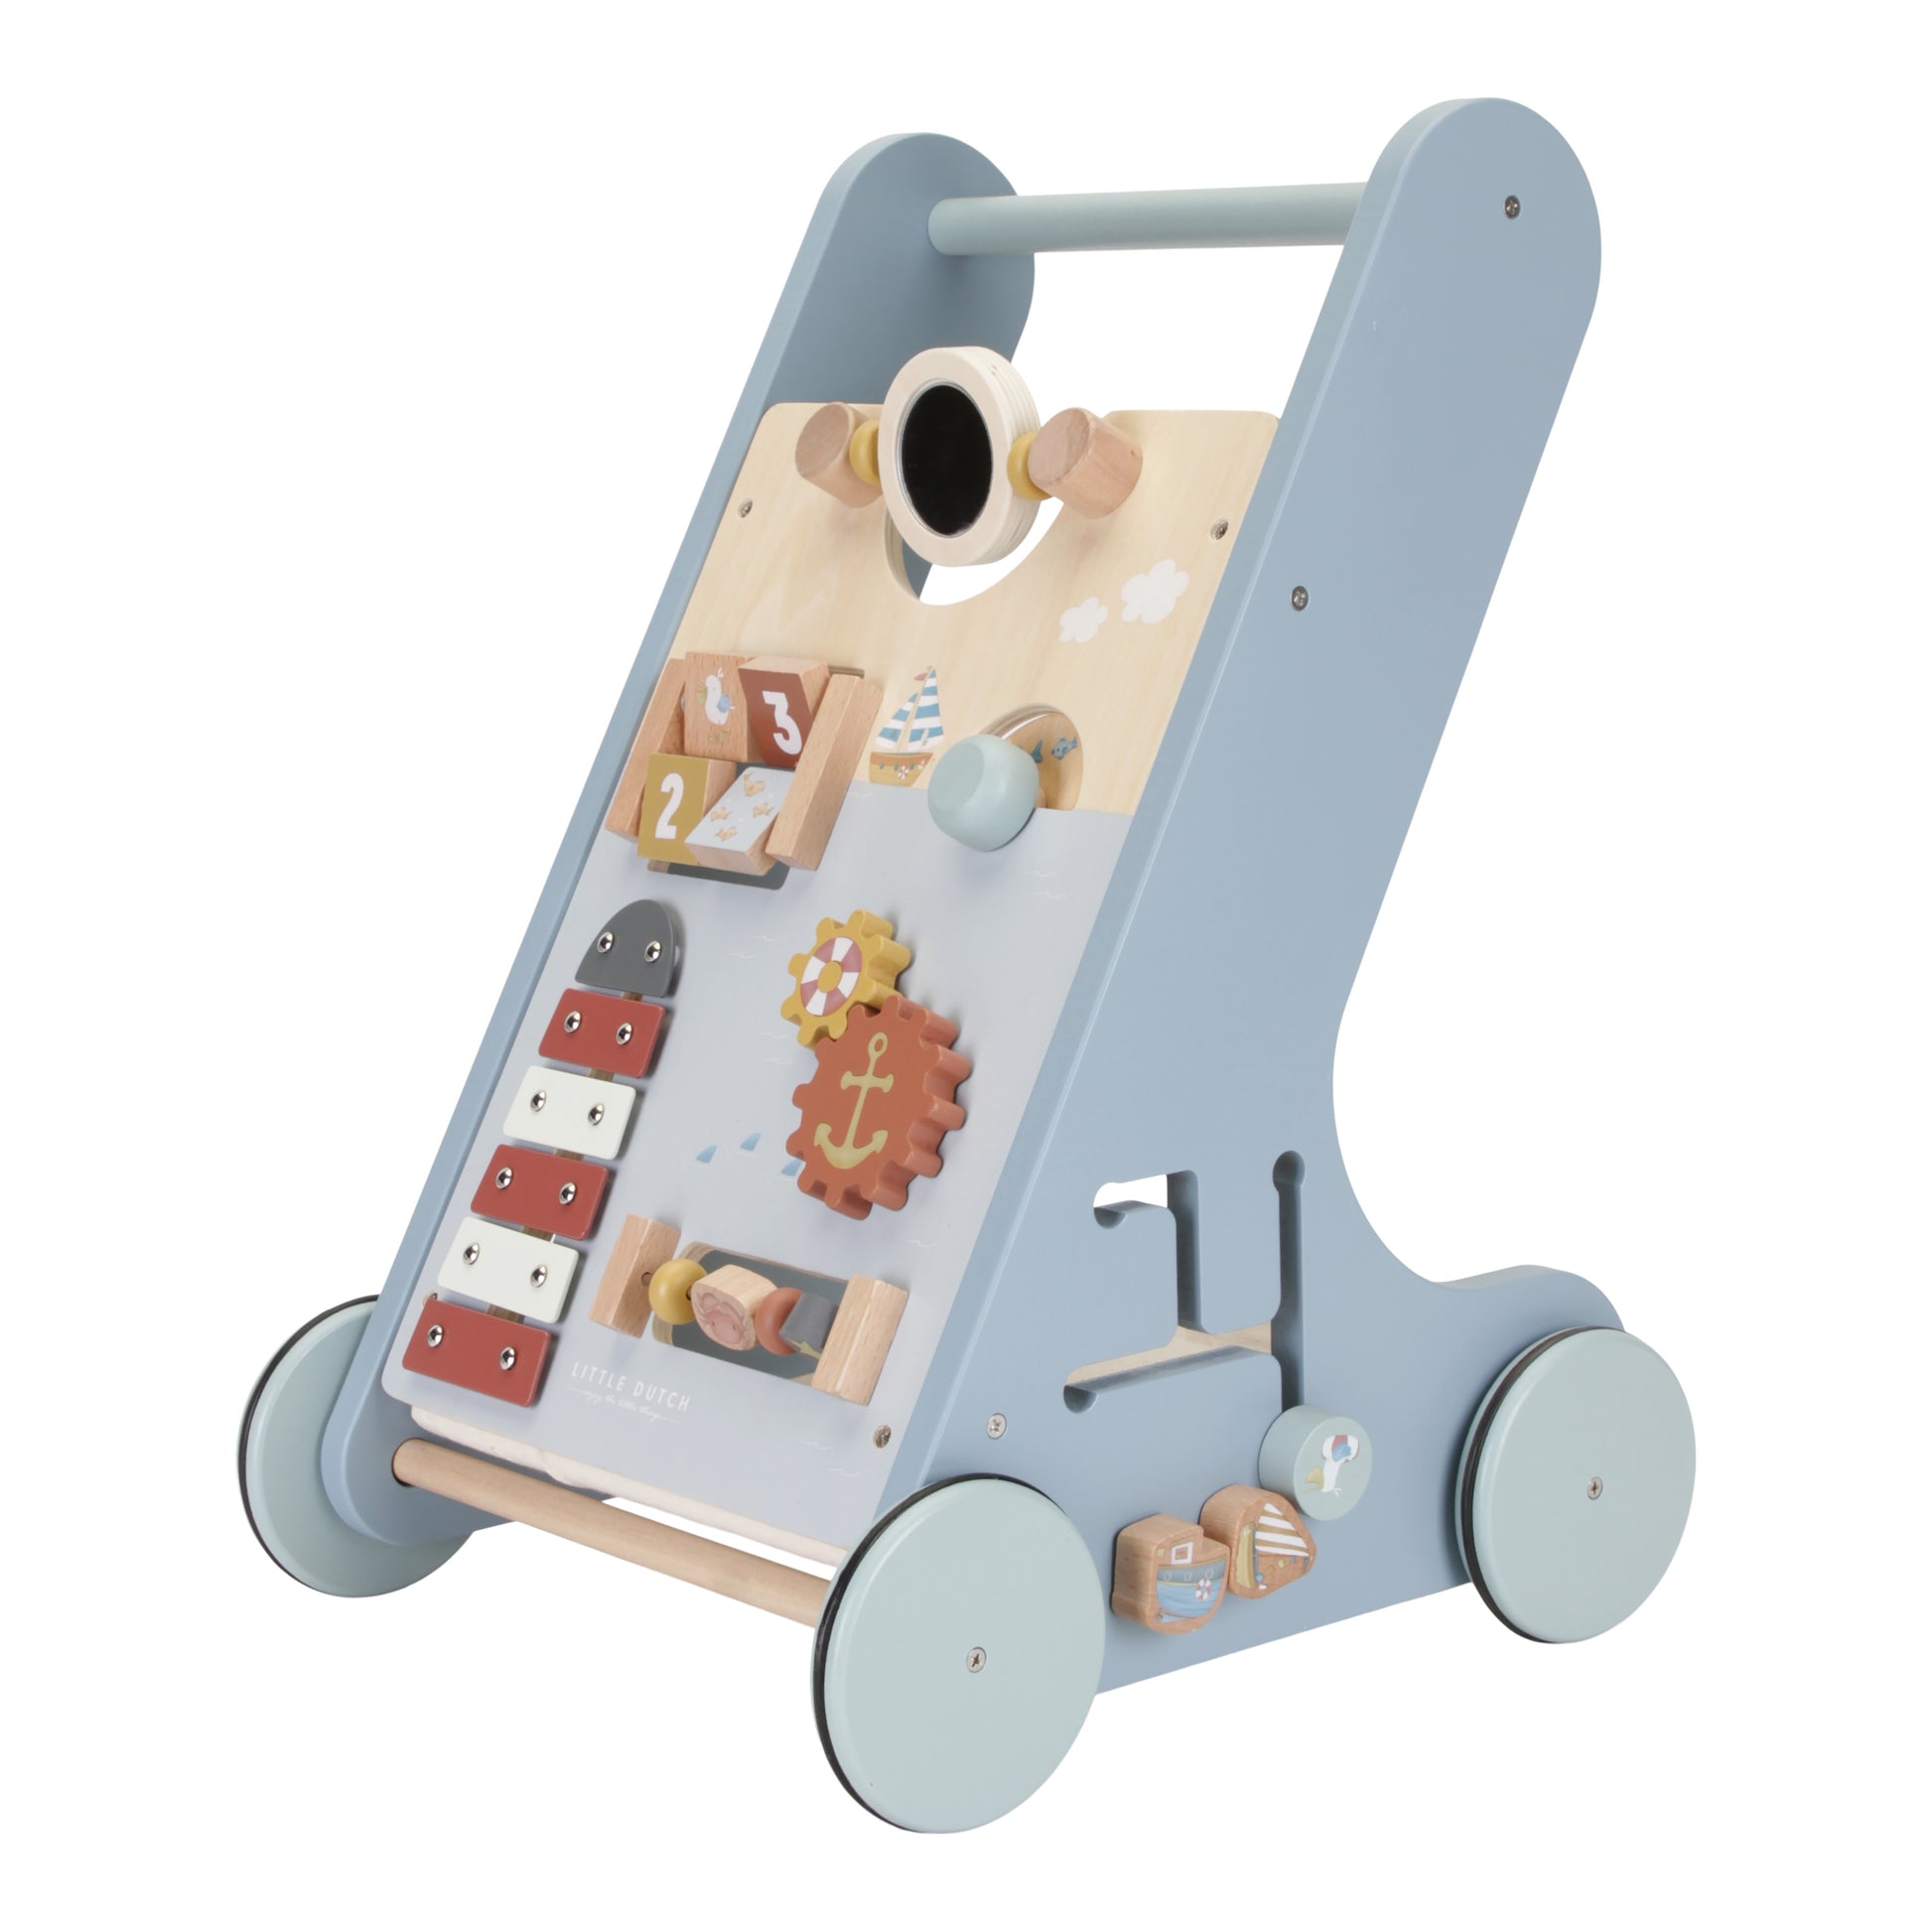 a wooden toy with wheels and knobs on a white background